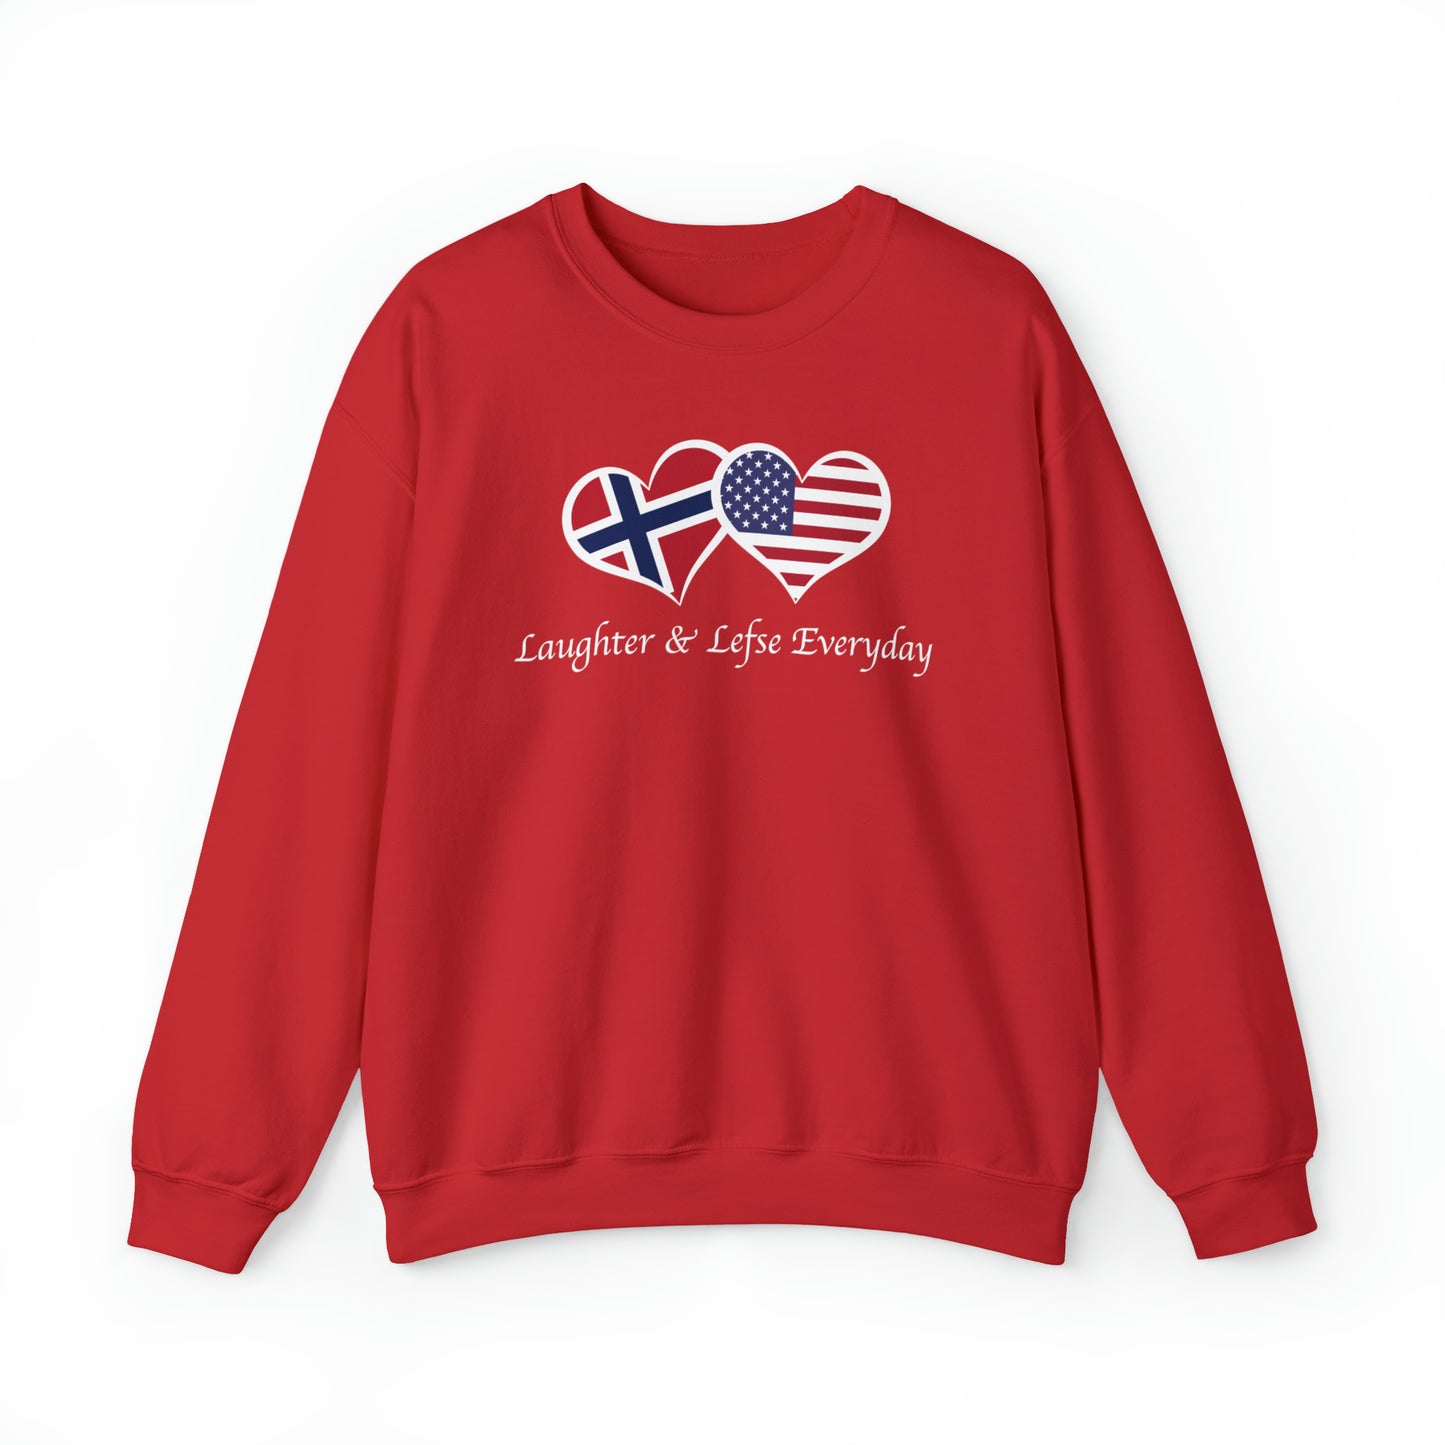 Laughter & Lefse Everyday Sweatshirt: Cozy Comfort with a Dash of Nordic Charm!